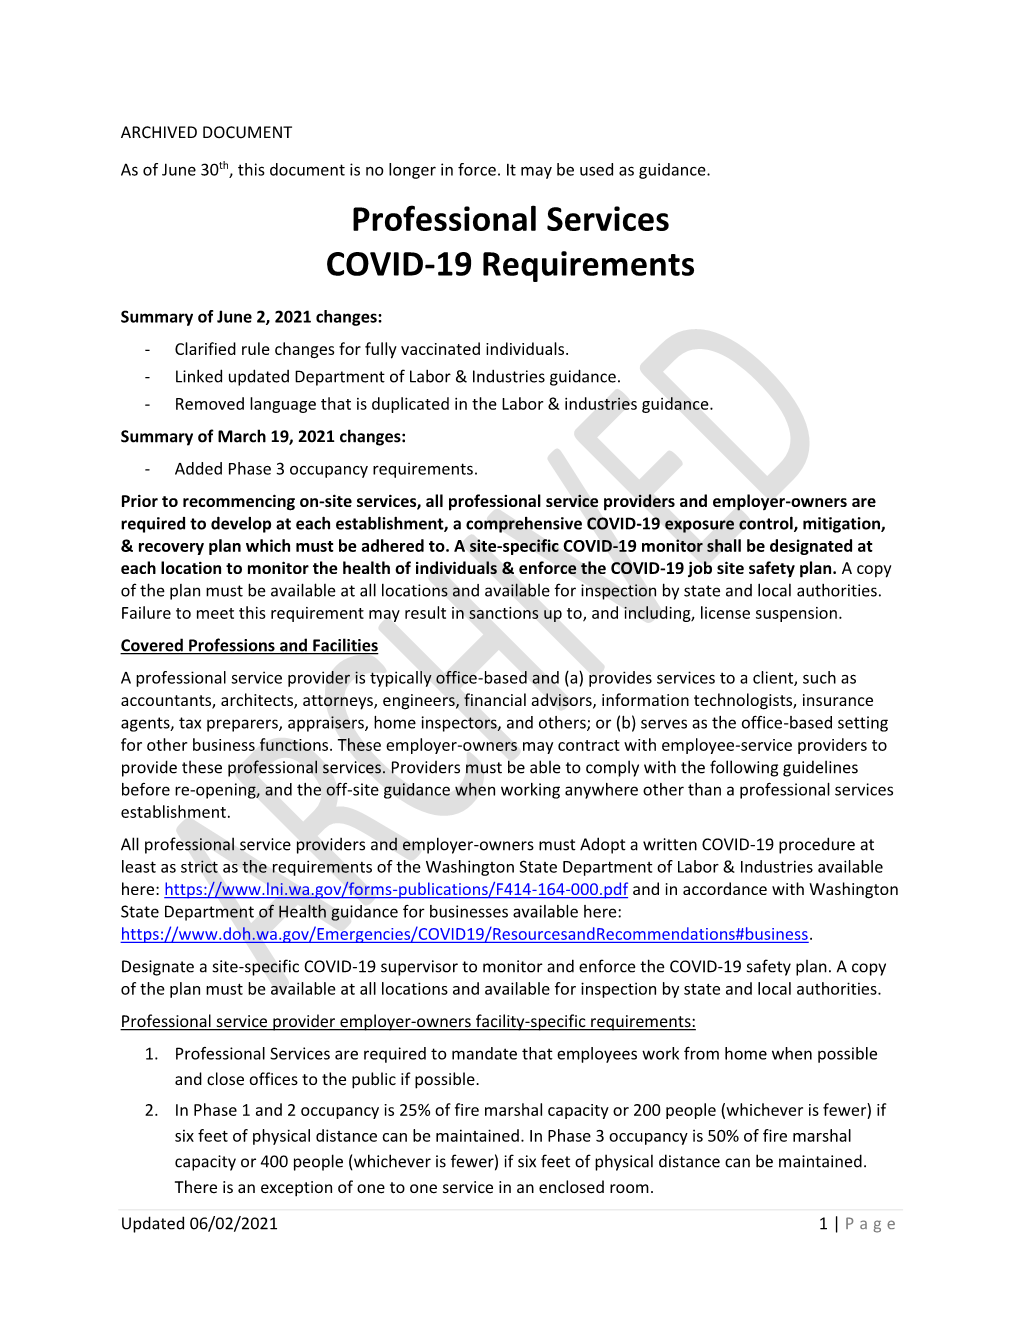 Professional Services COVID-19 Requirements